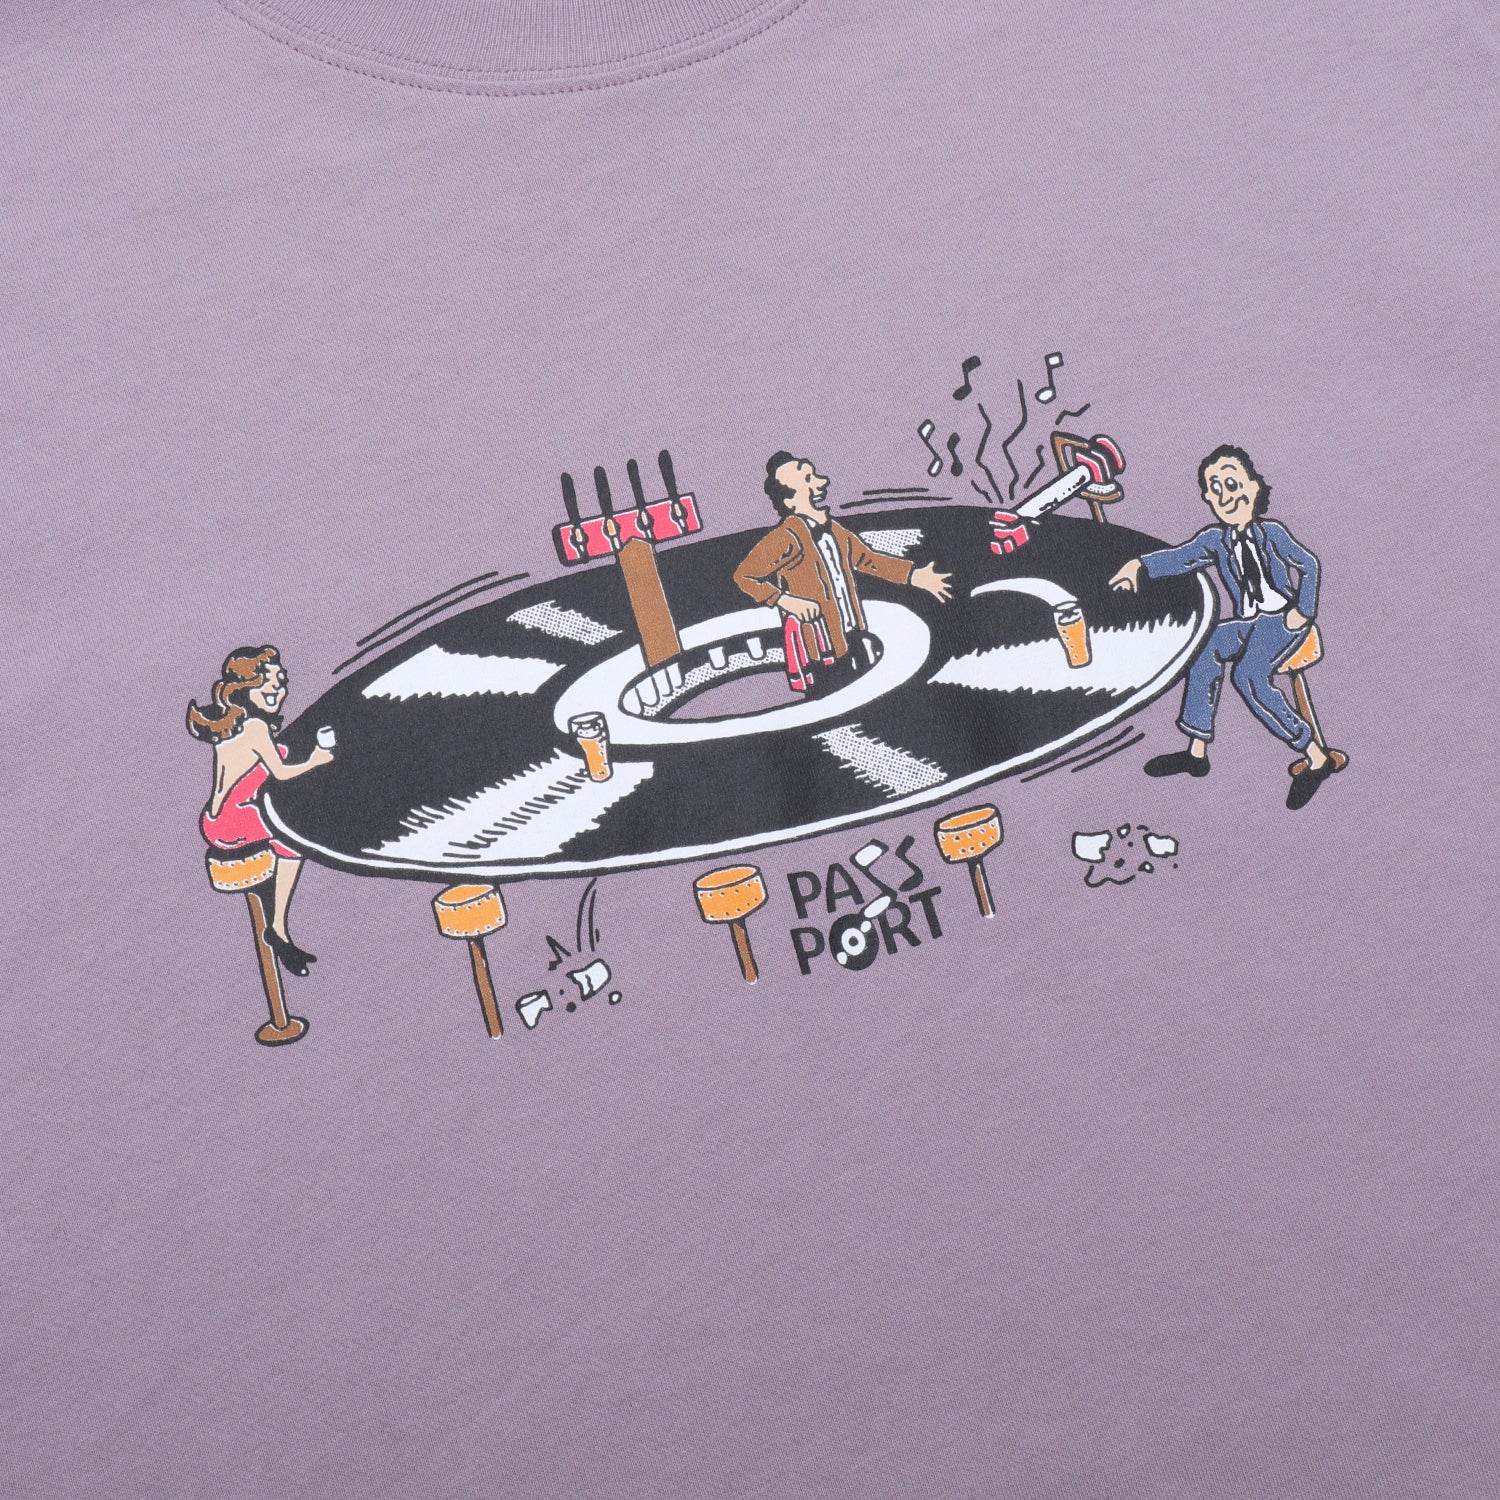 Pass~Port Lazy Susan Tee - Dusty Lilac